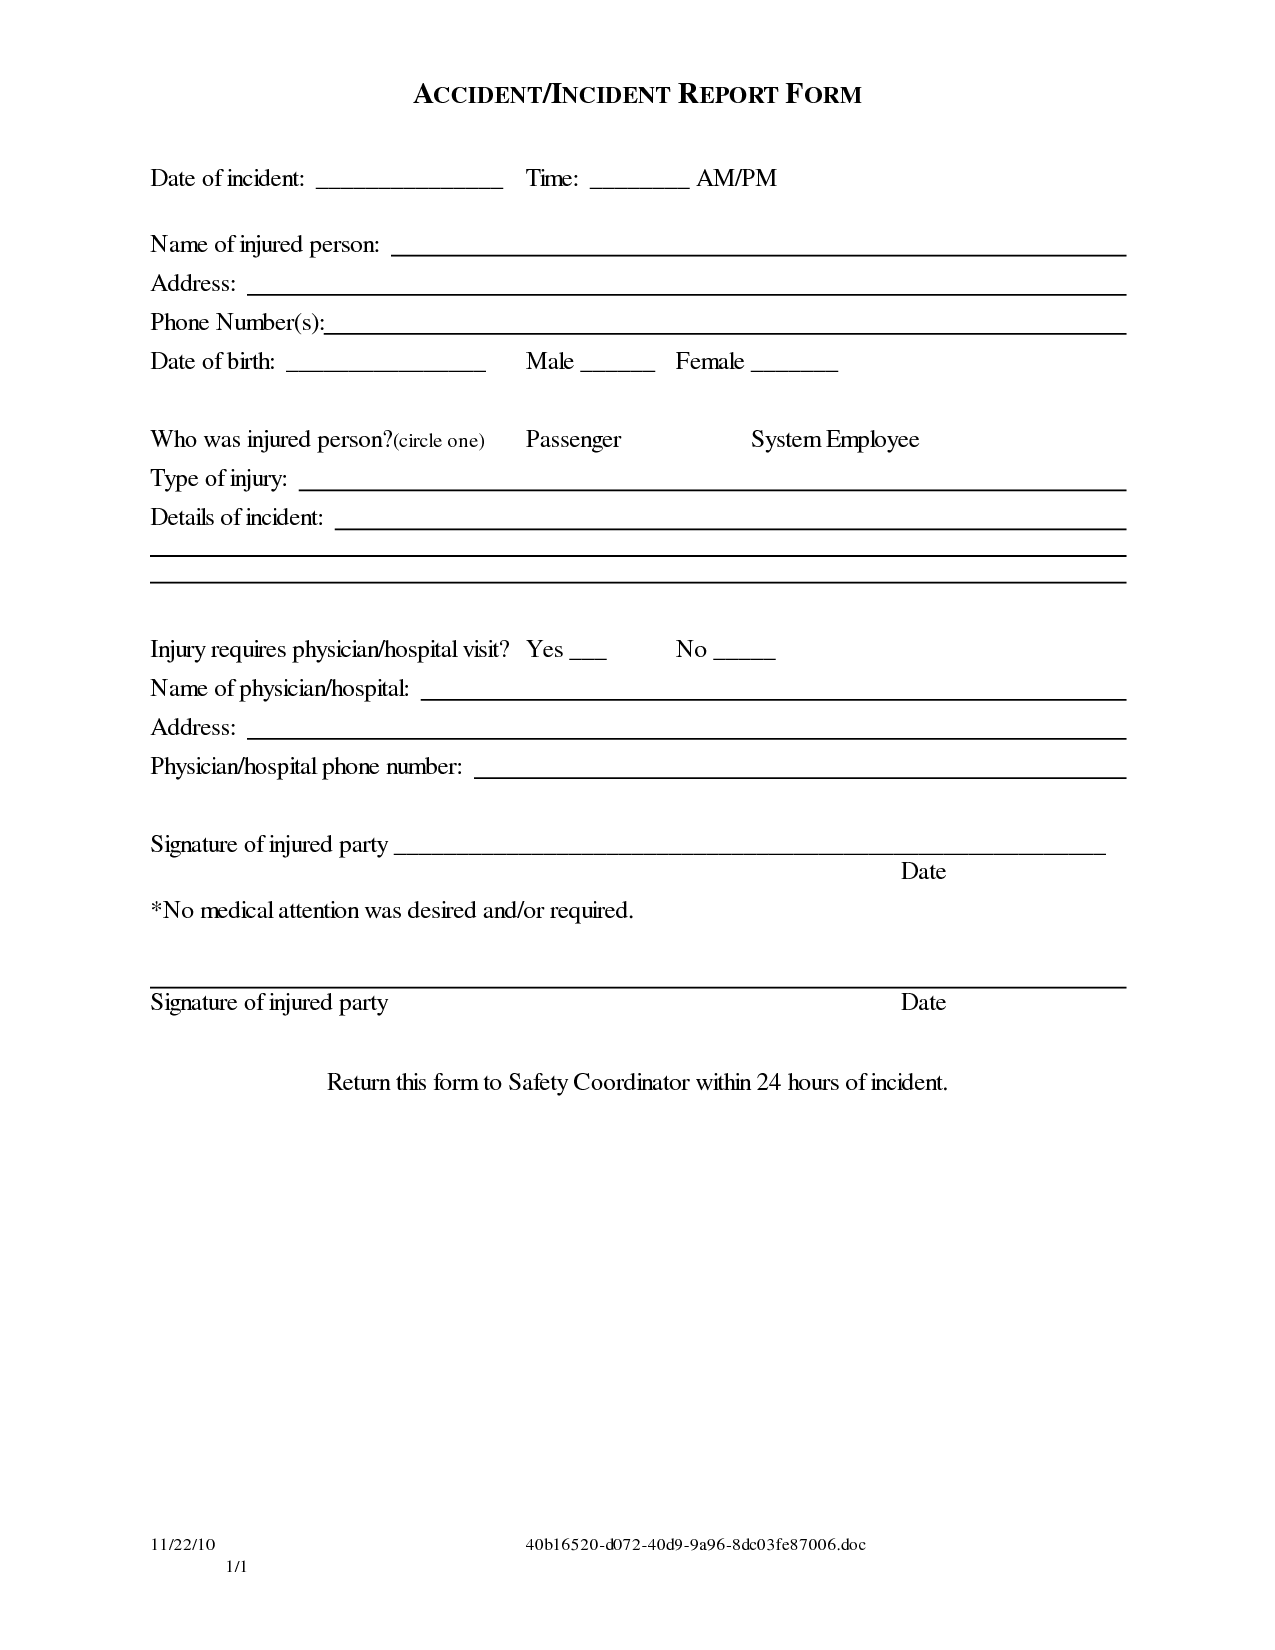 Car accident liability release form template sample